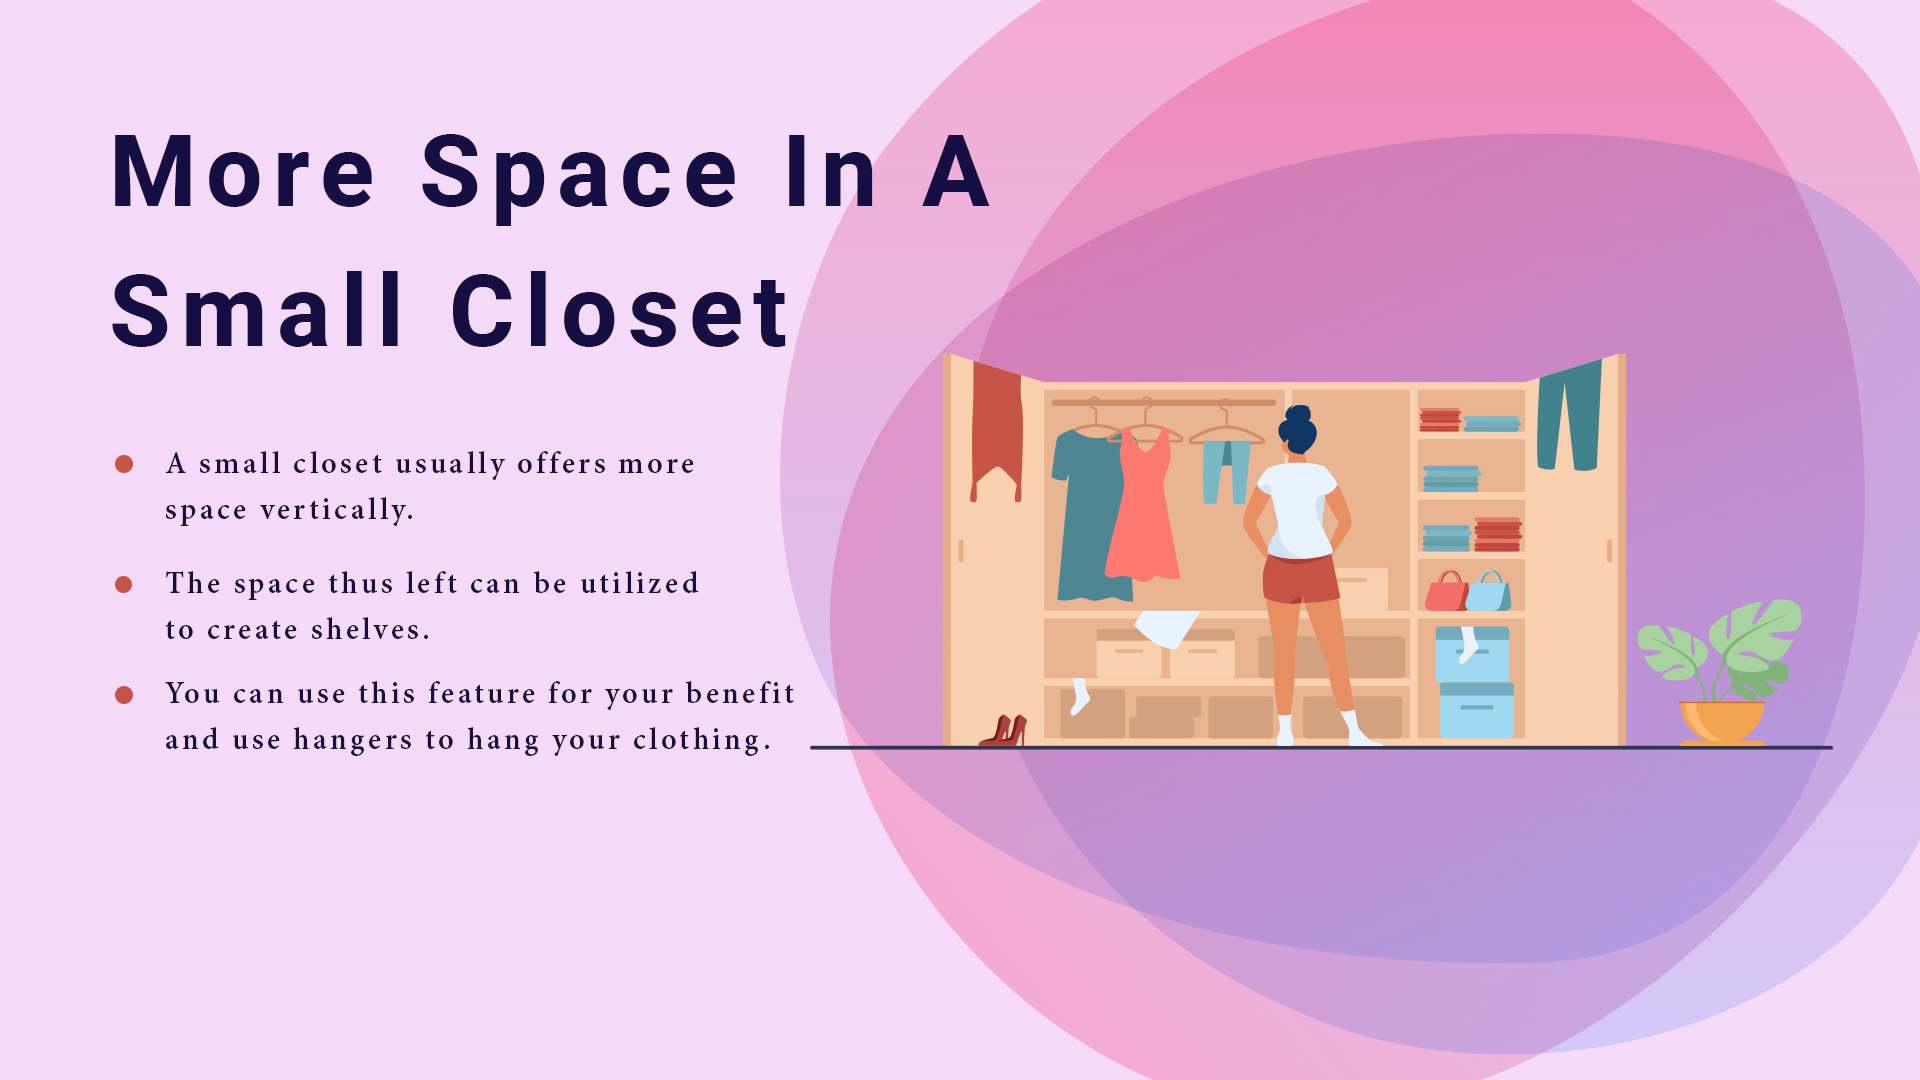 How to Create More Space in a Small Closet